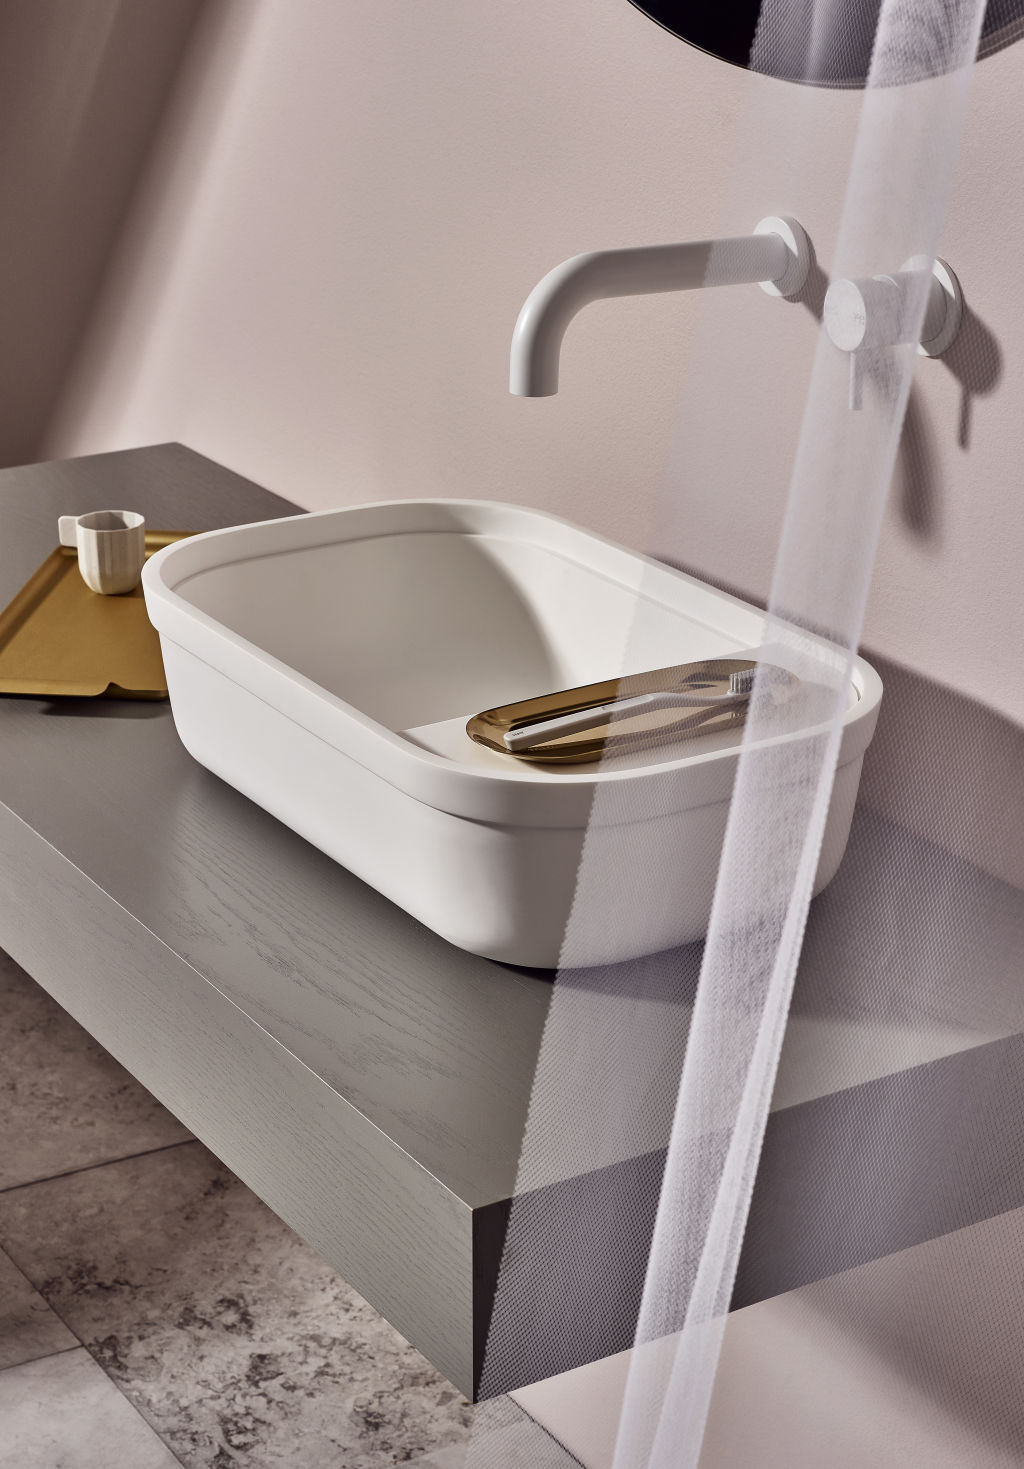 Orlo Basins by United Products. Photo: Haydn Cattach